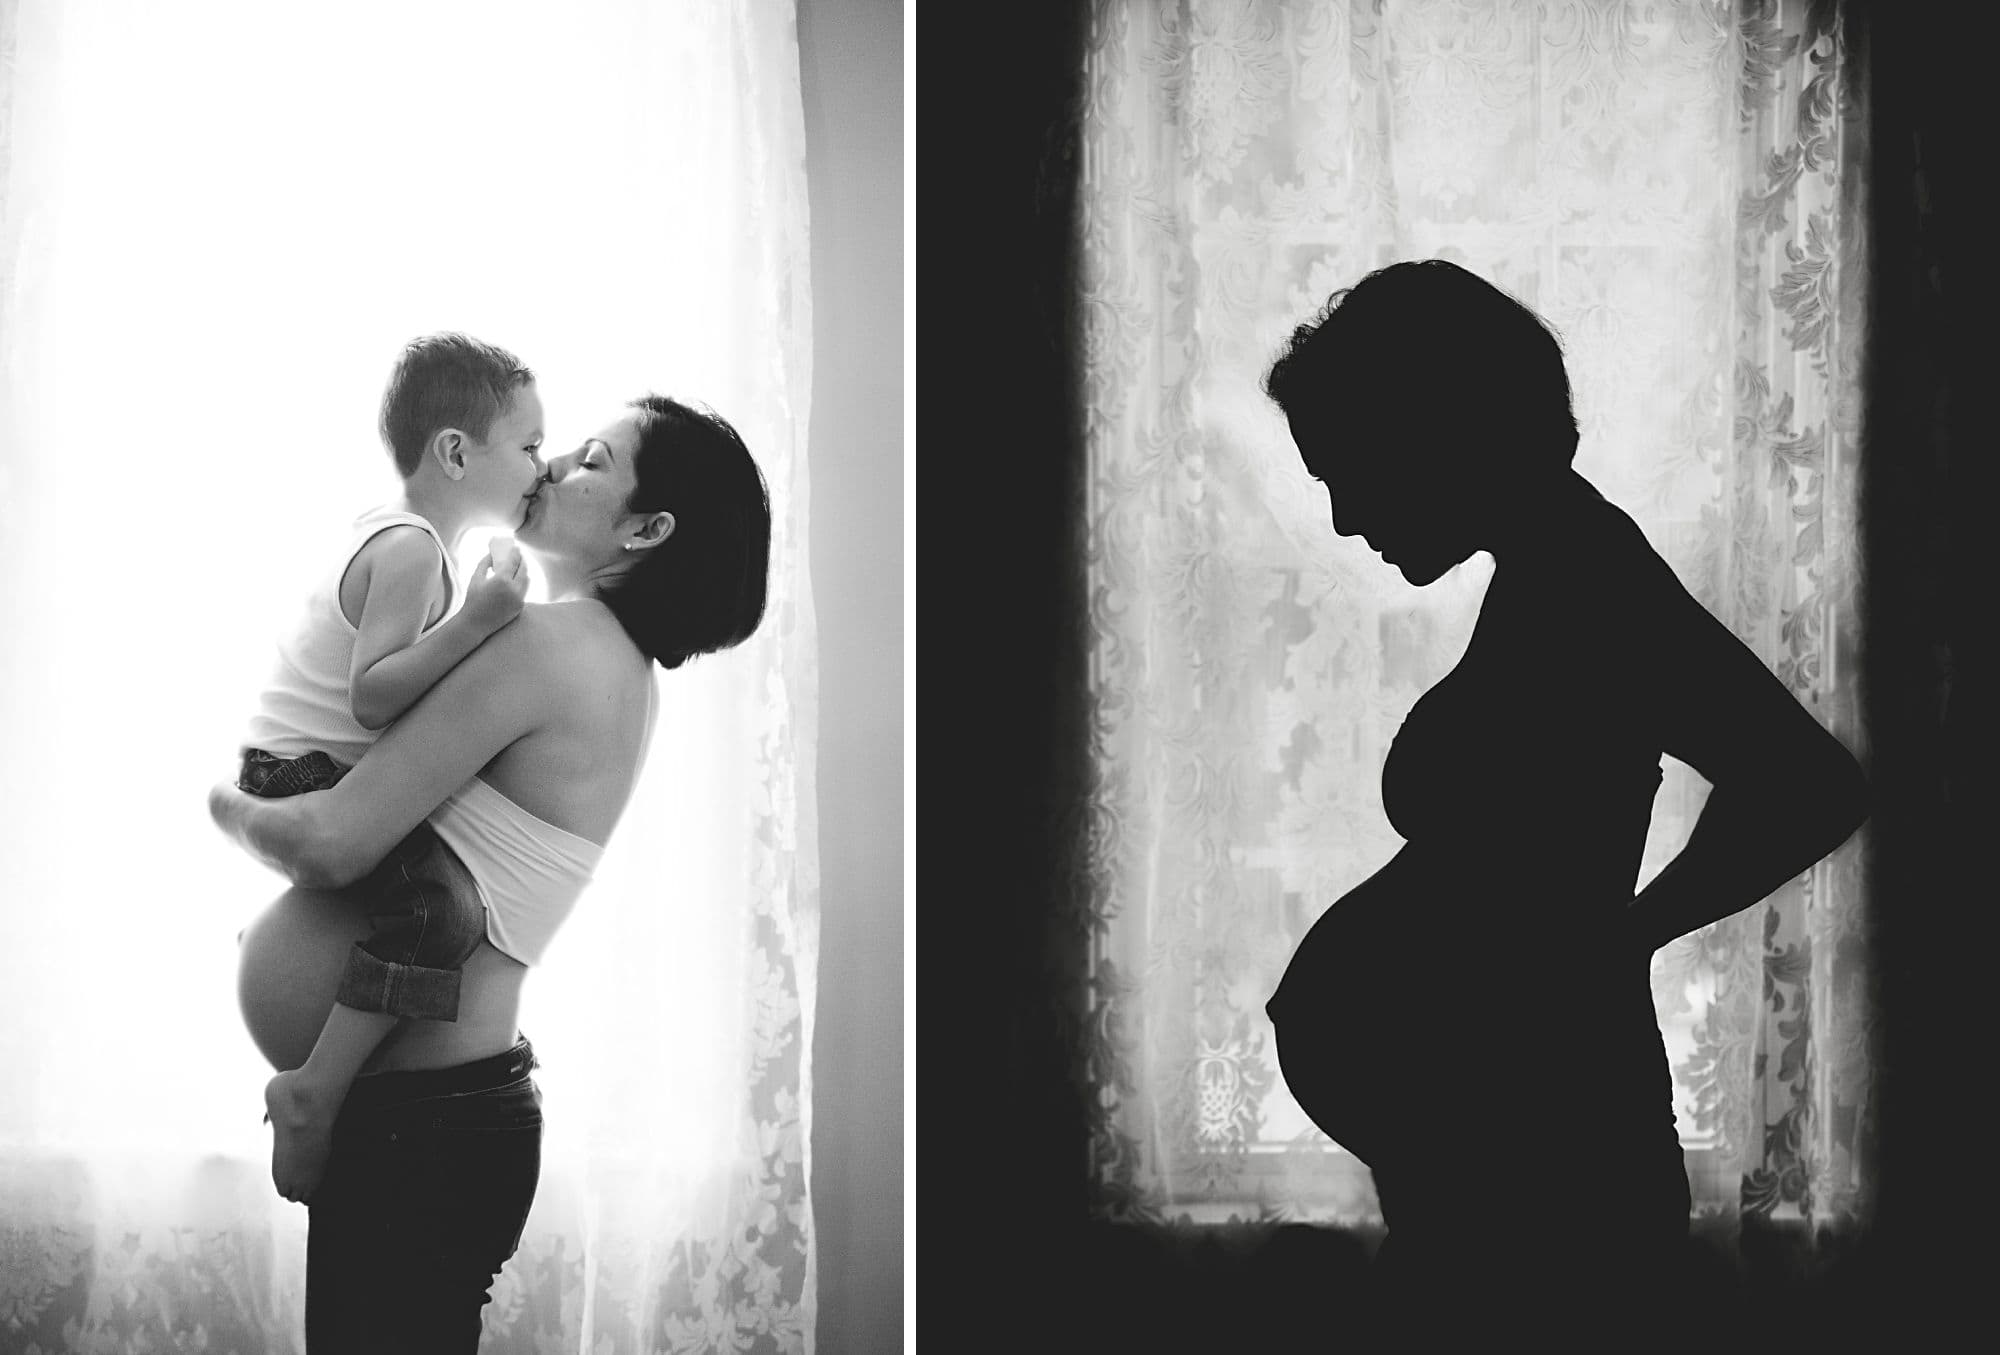 Black and white maternity portraits with mother and son and a silhouette